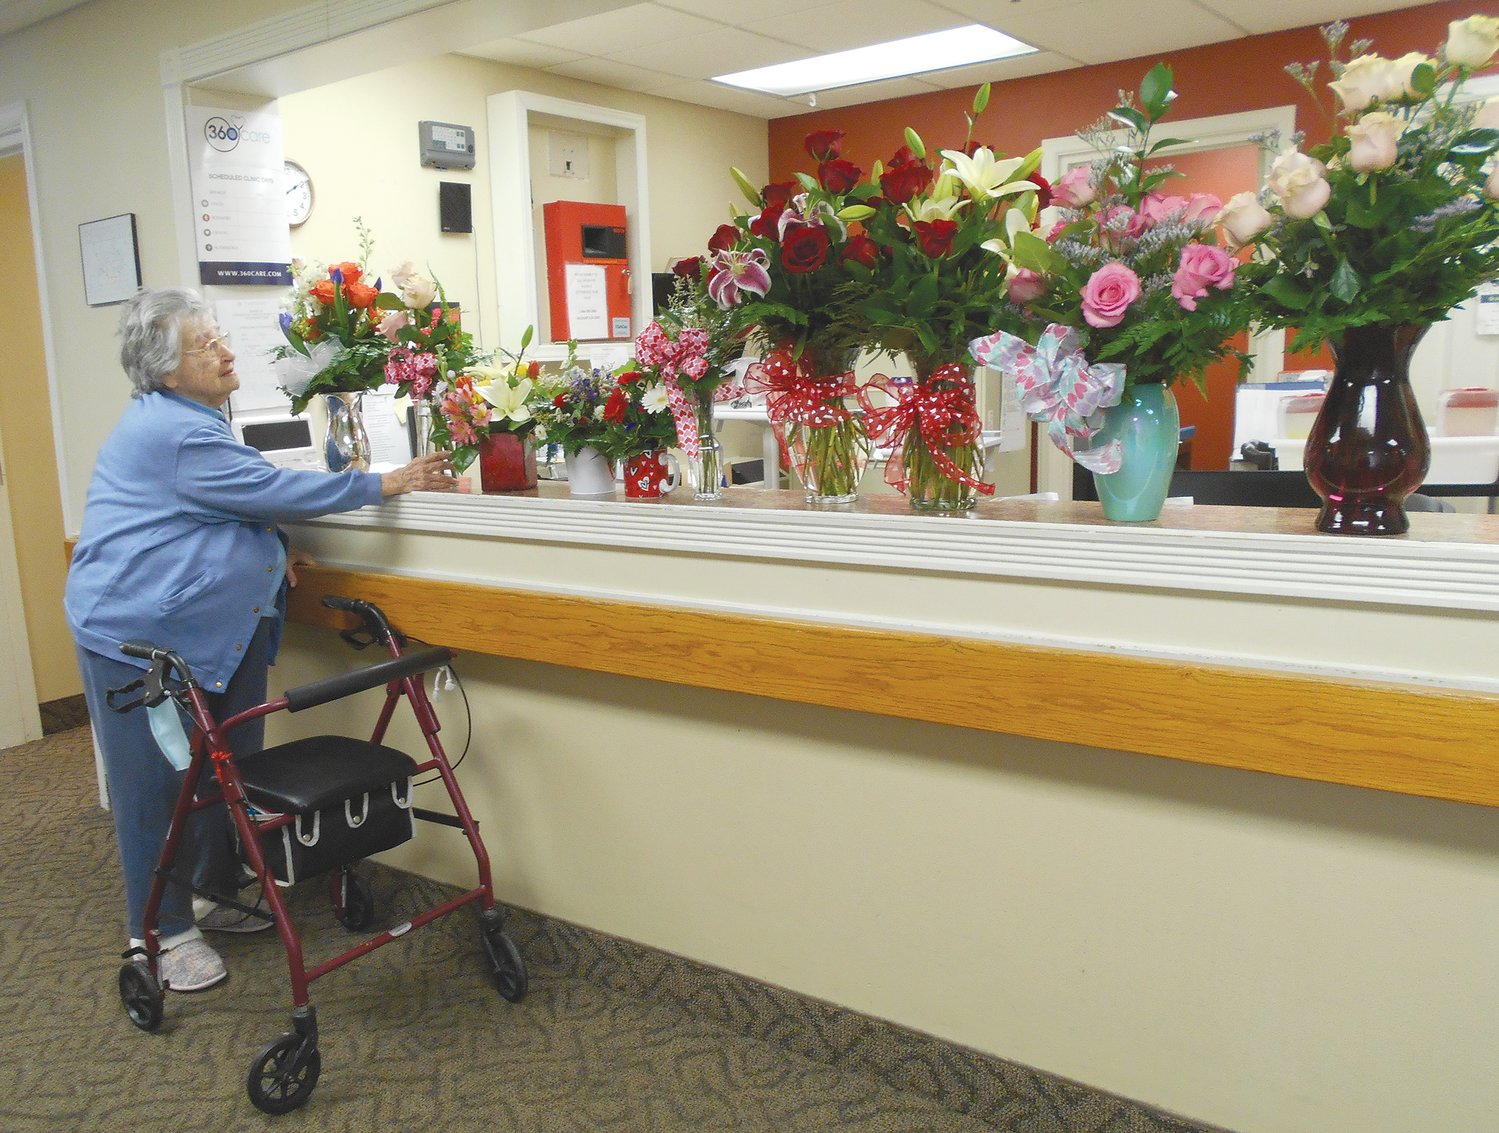 Irene Bratton, a resident of Hickory Creek at Crawfordsville, admires a special surprise flower delivery from Just Because Flower Shop. Bratton selected an arrangement for her room. Sherry Bratcher, Hickory Creek activities director, said the random act of kindness displayed by the local floral shop brightened the residents